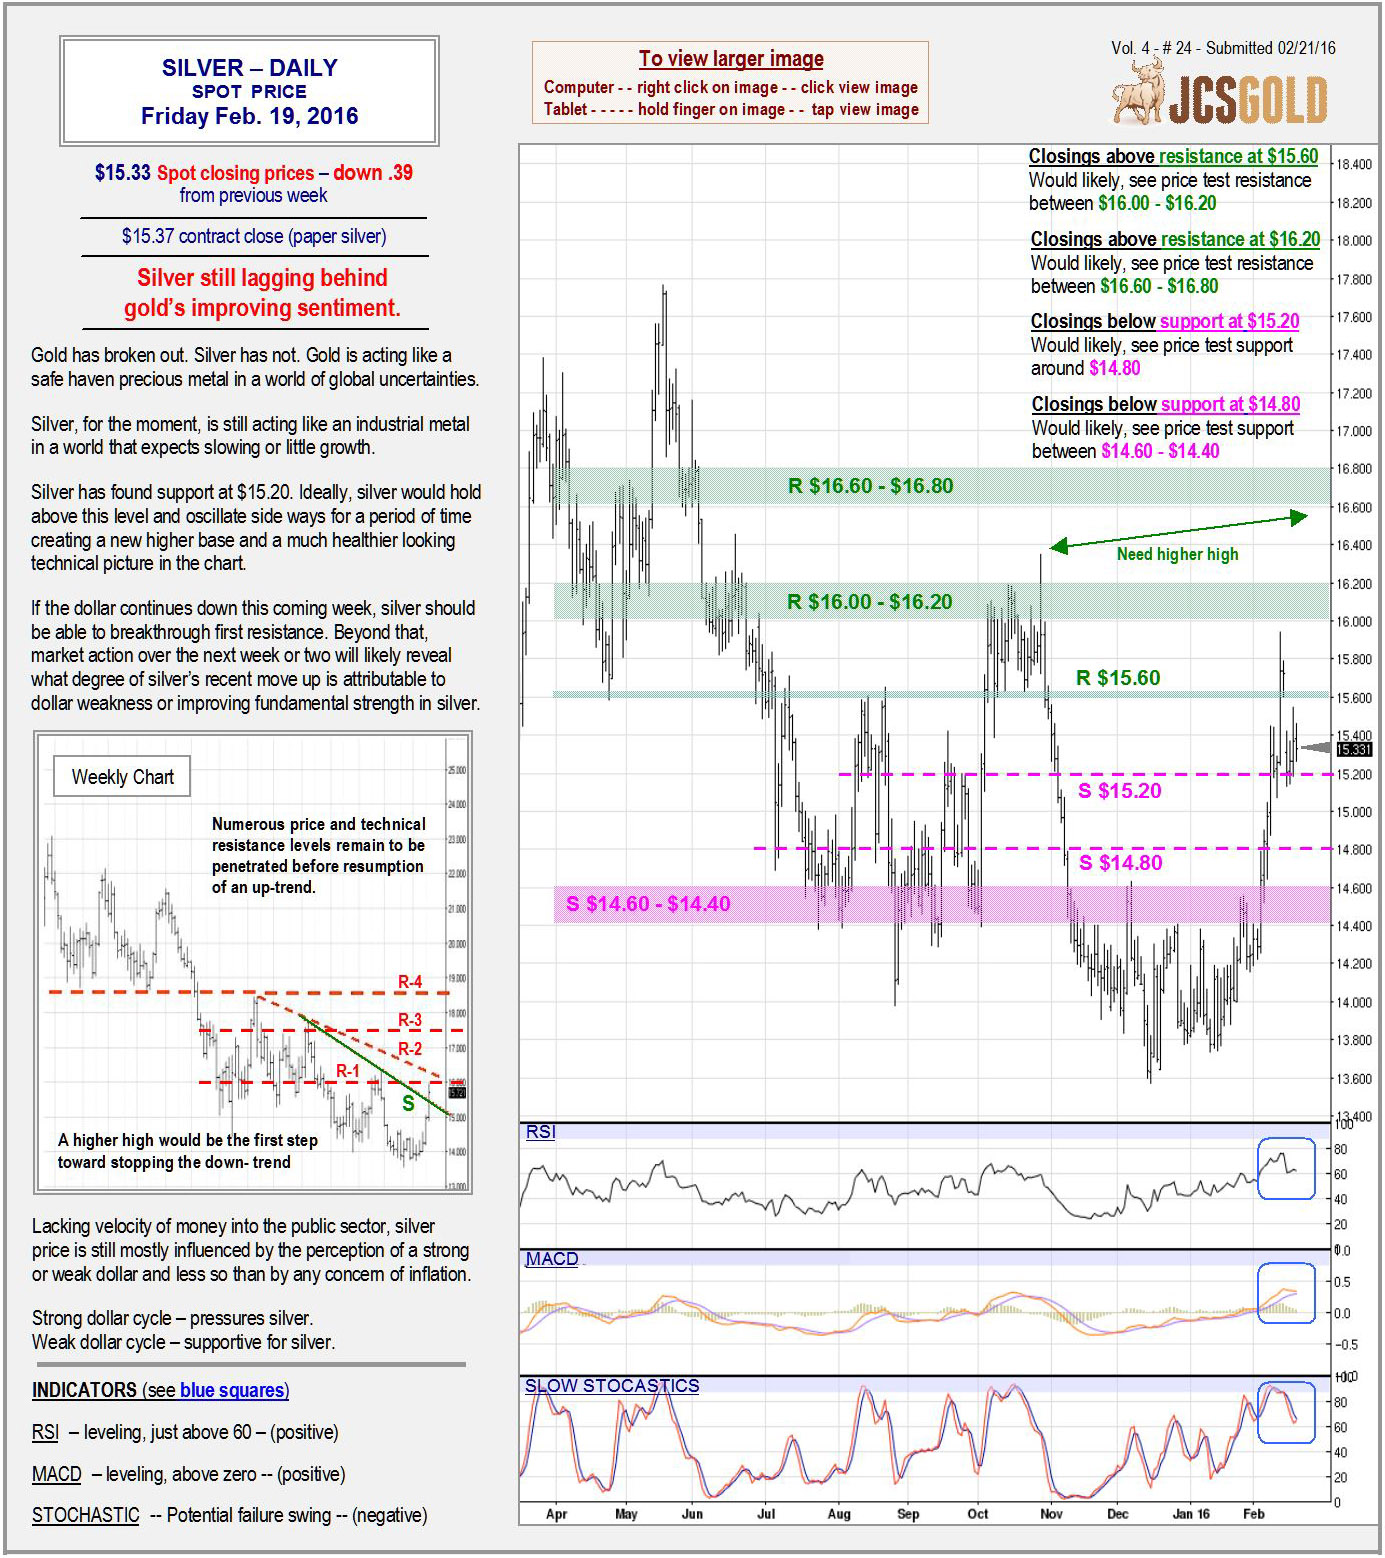 Feb 19, 2016 chart & commentary